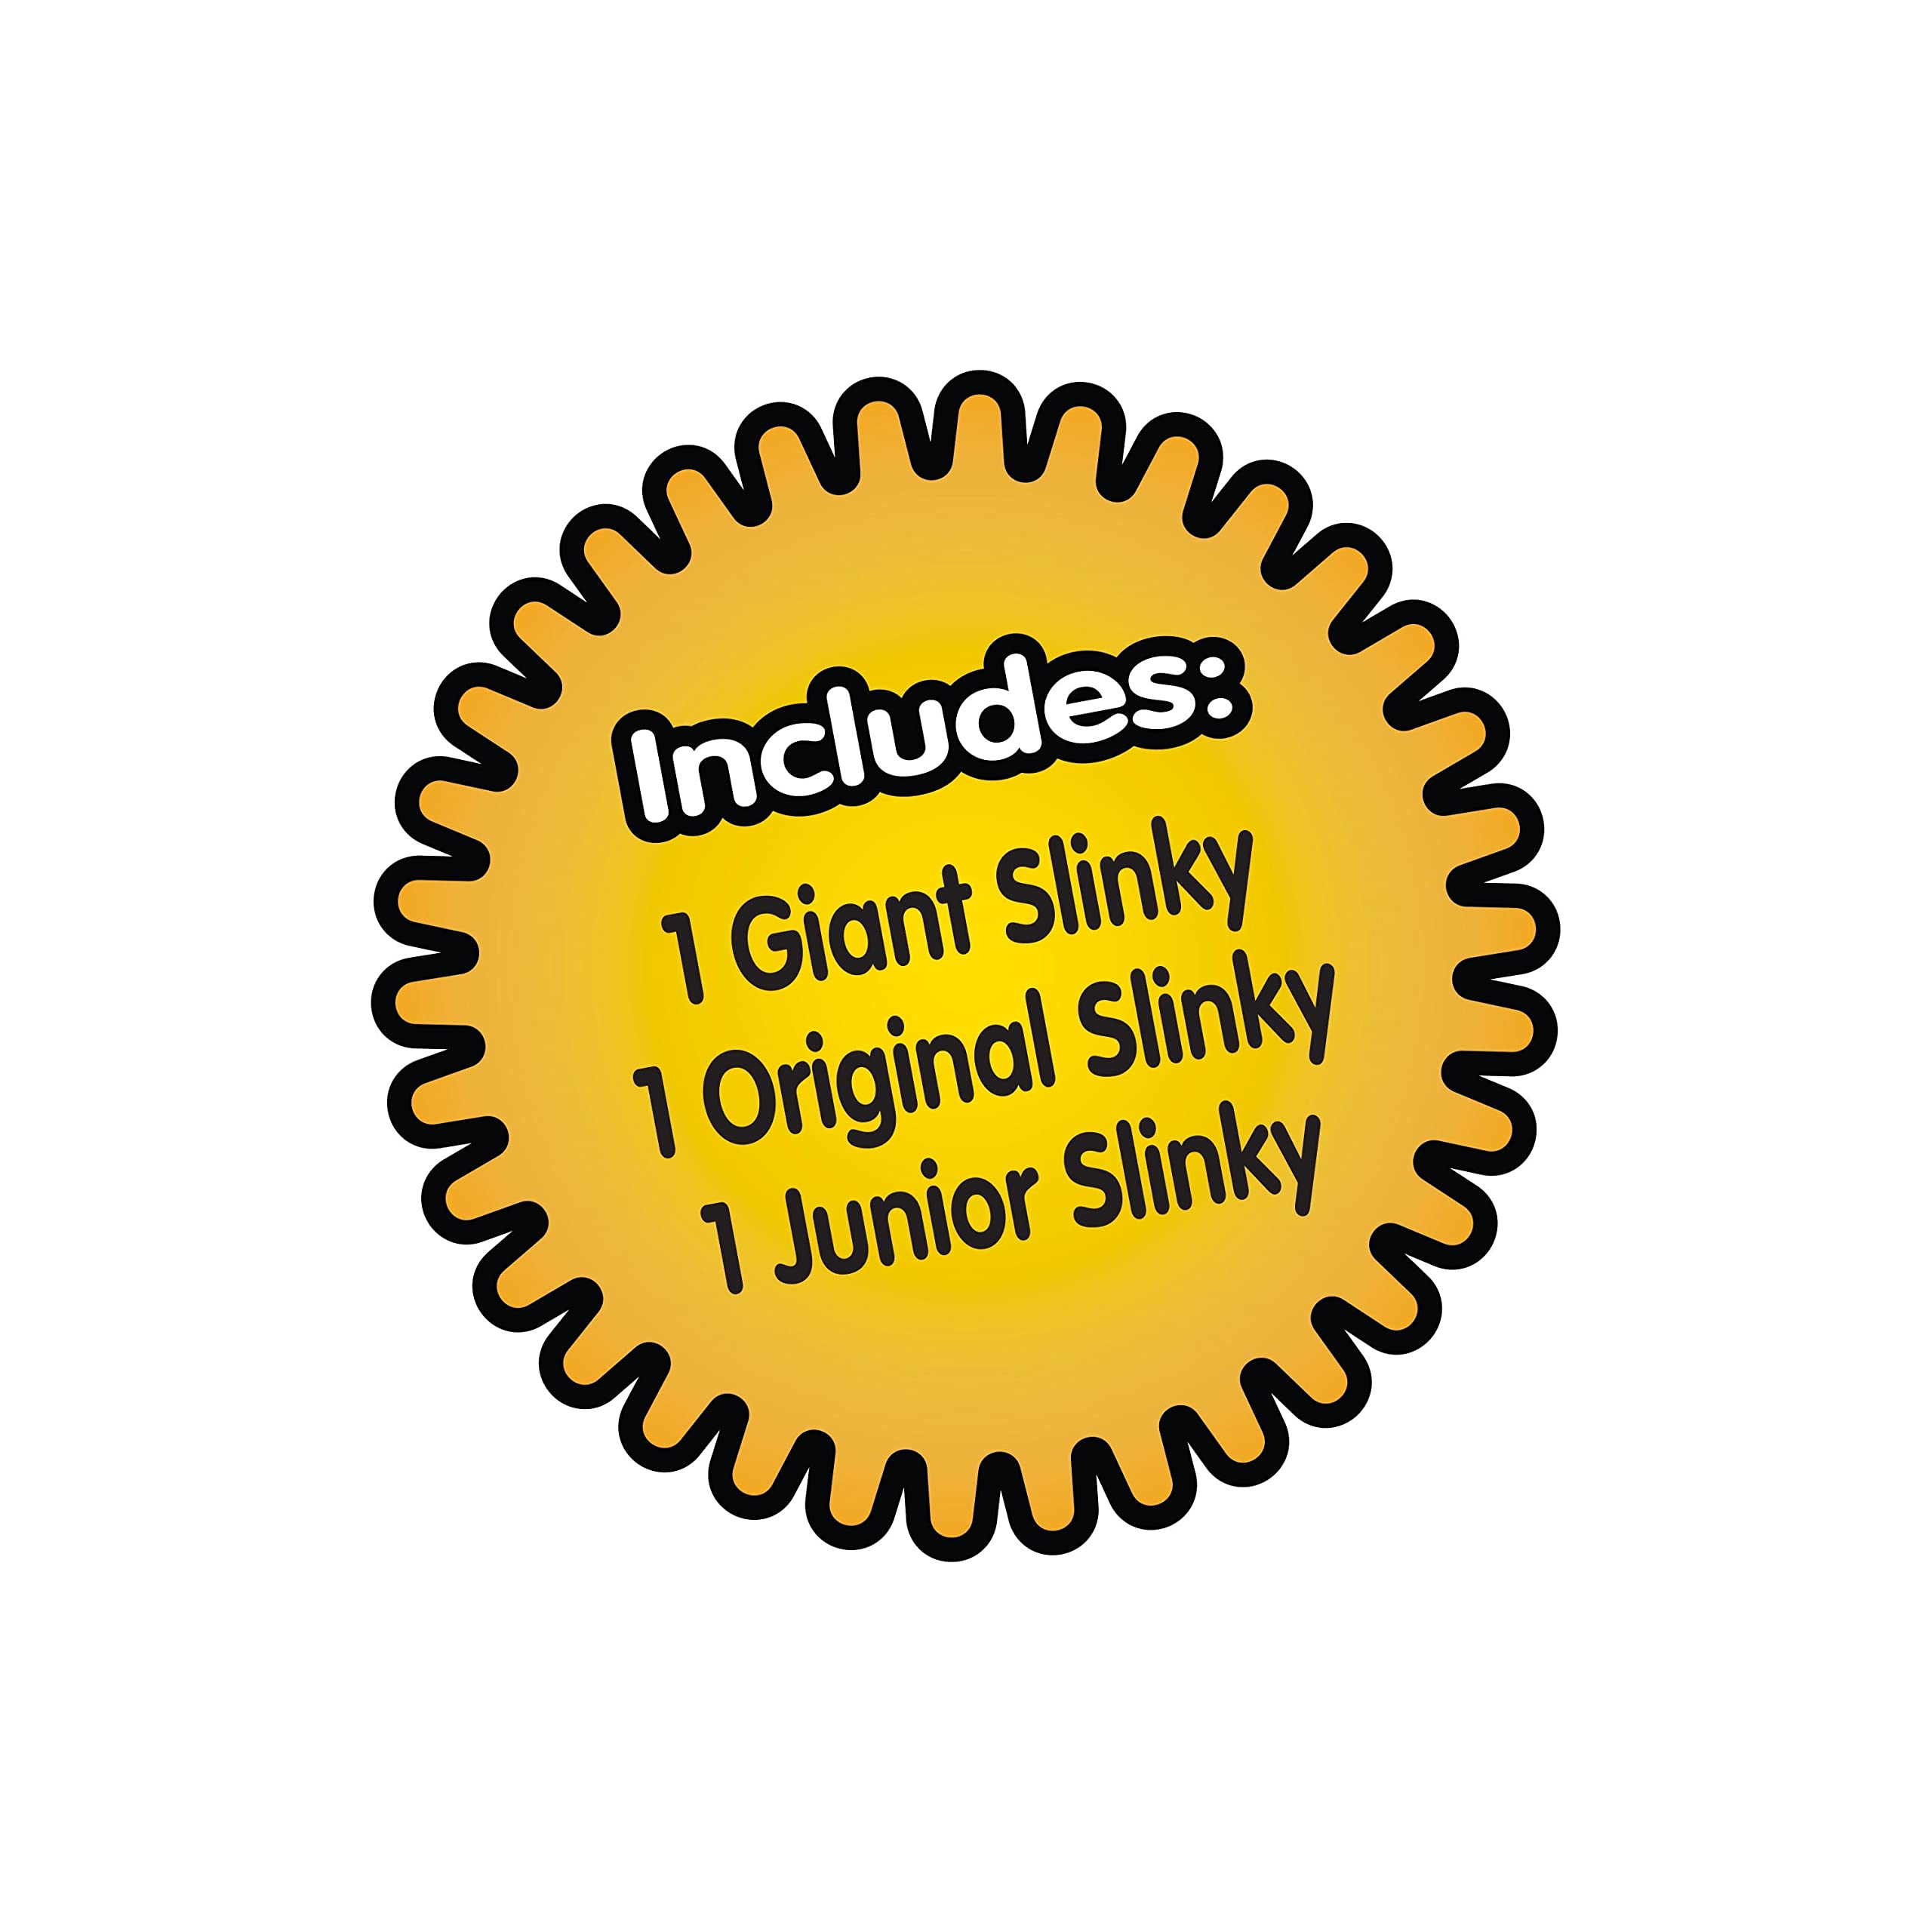 The Original Slinky® Brand 3-Pack: 1 Giant, 1 Classic, and 1 Slinky Junior Walking Plastic Spring Toy, Kids Toys for Ages 5 Up, Gifts and Presents, Amazon Exclusive